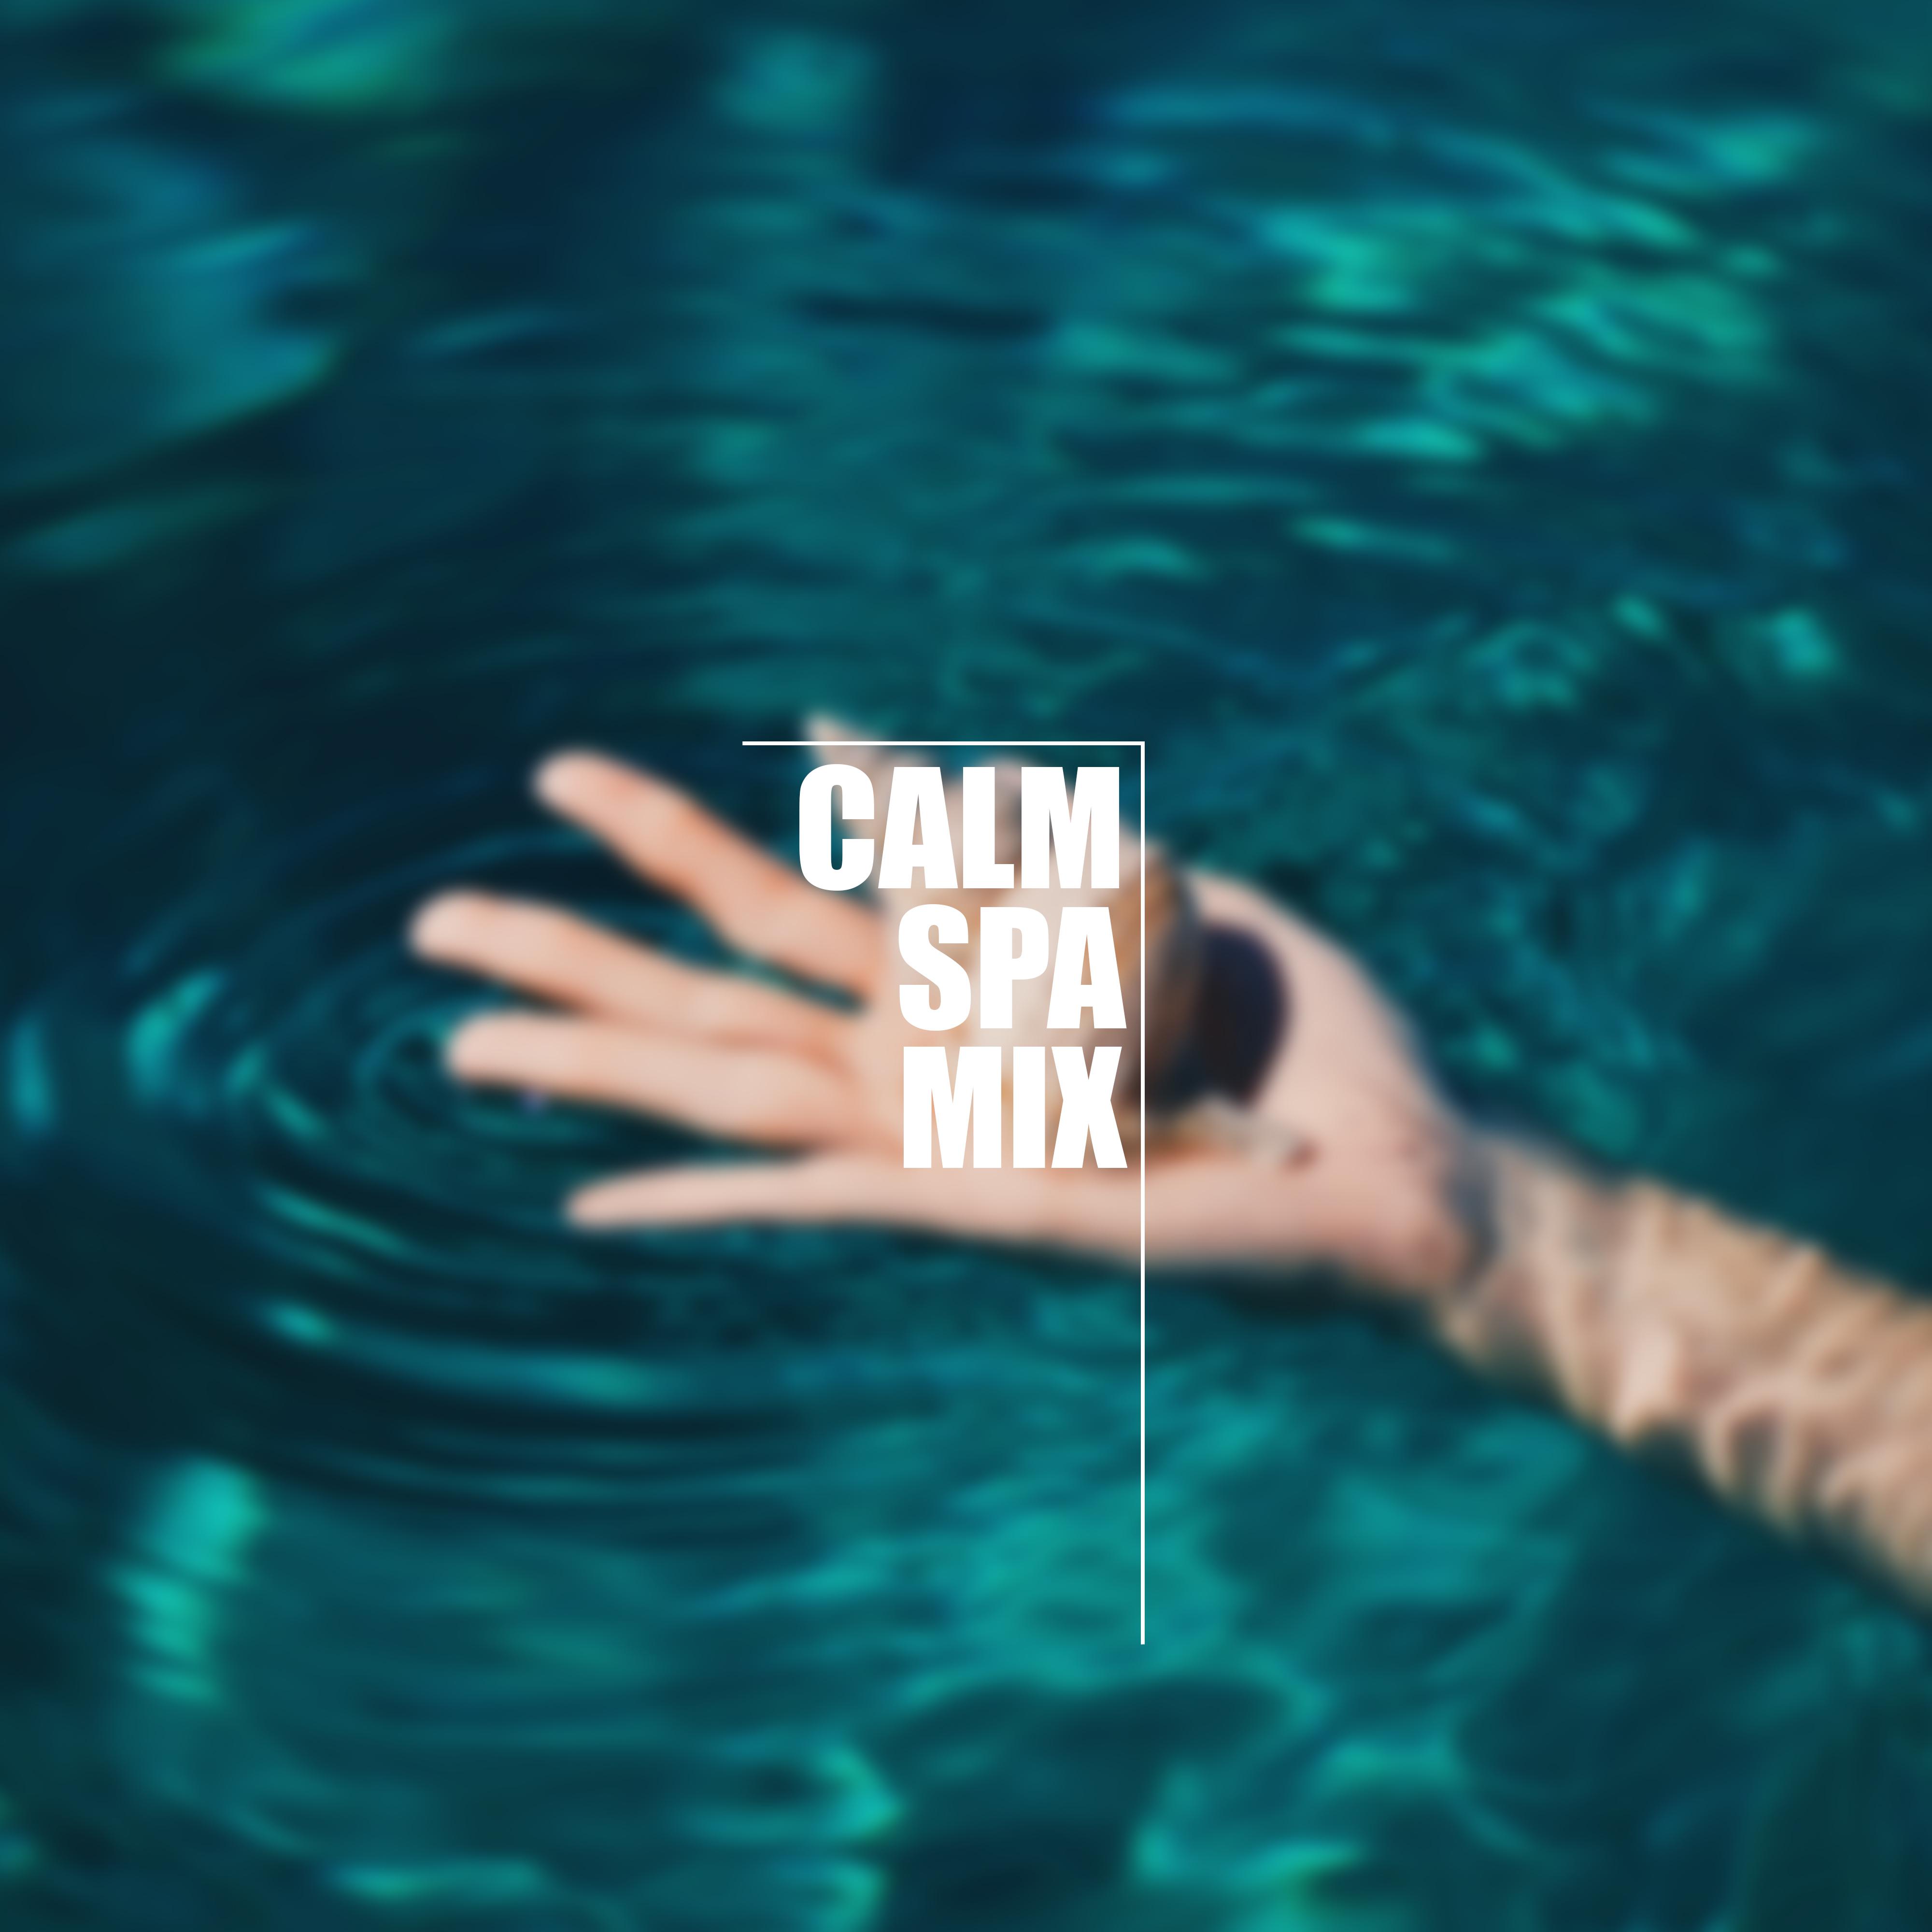 Calm Spa Mix  Relaxing Music Therapy, Spa Zen, Reduce Stress, Sensual Massage, Spa Melodies, Pure Mind, Relaxing Vibes